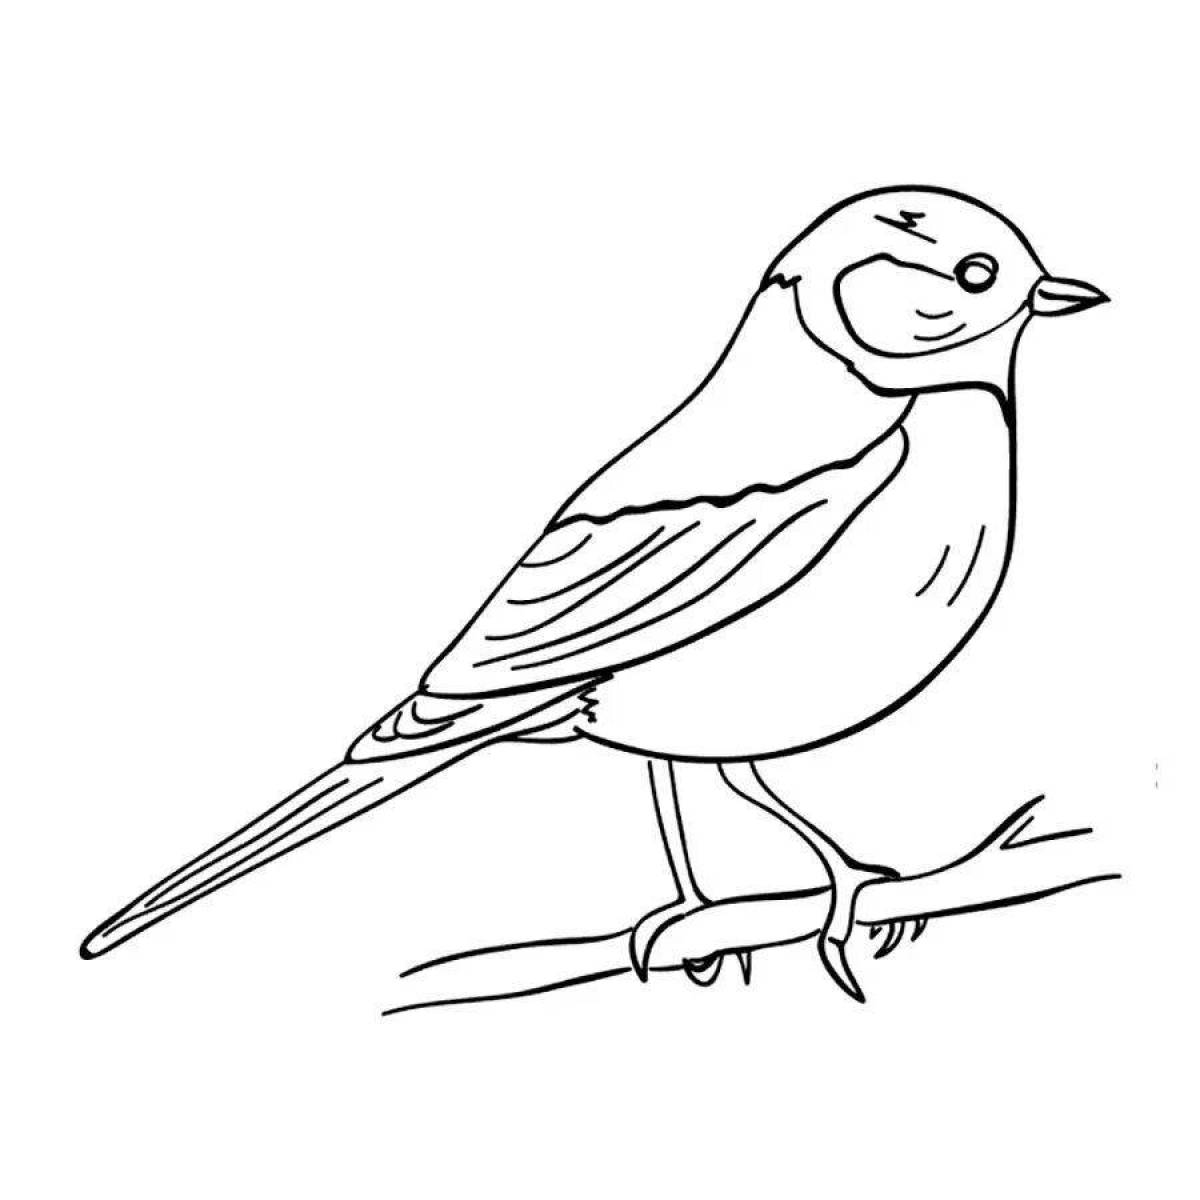 Titmouse on a branch #5